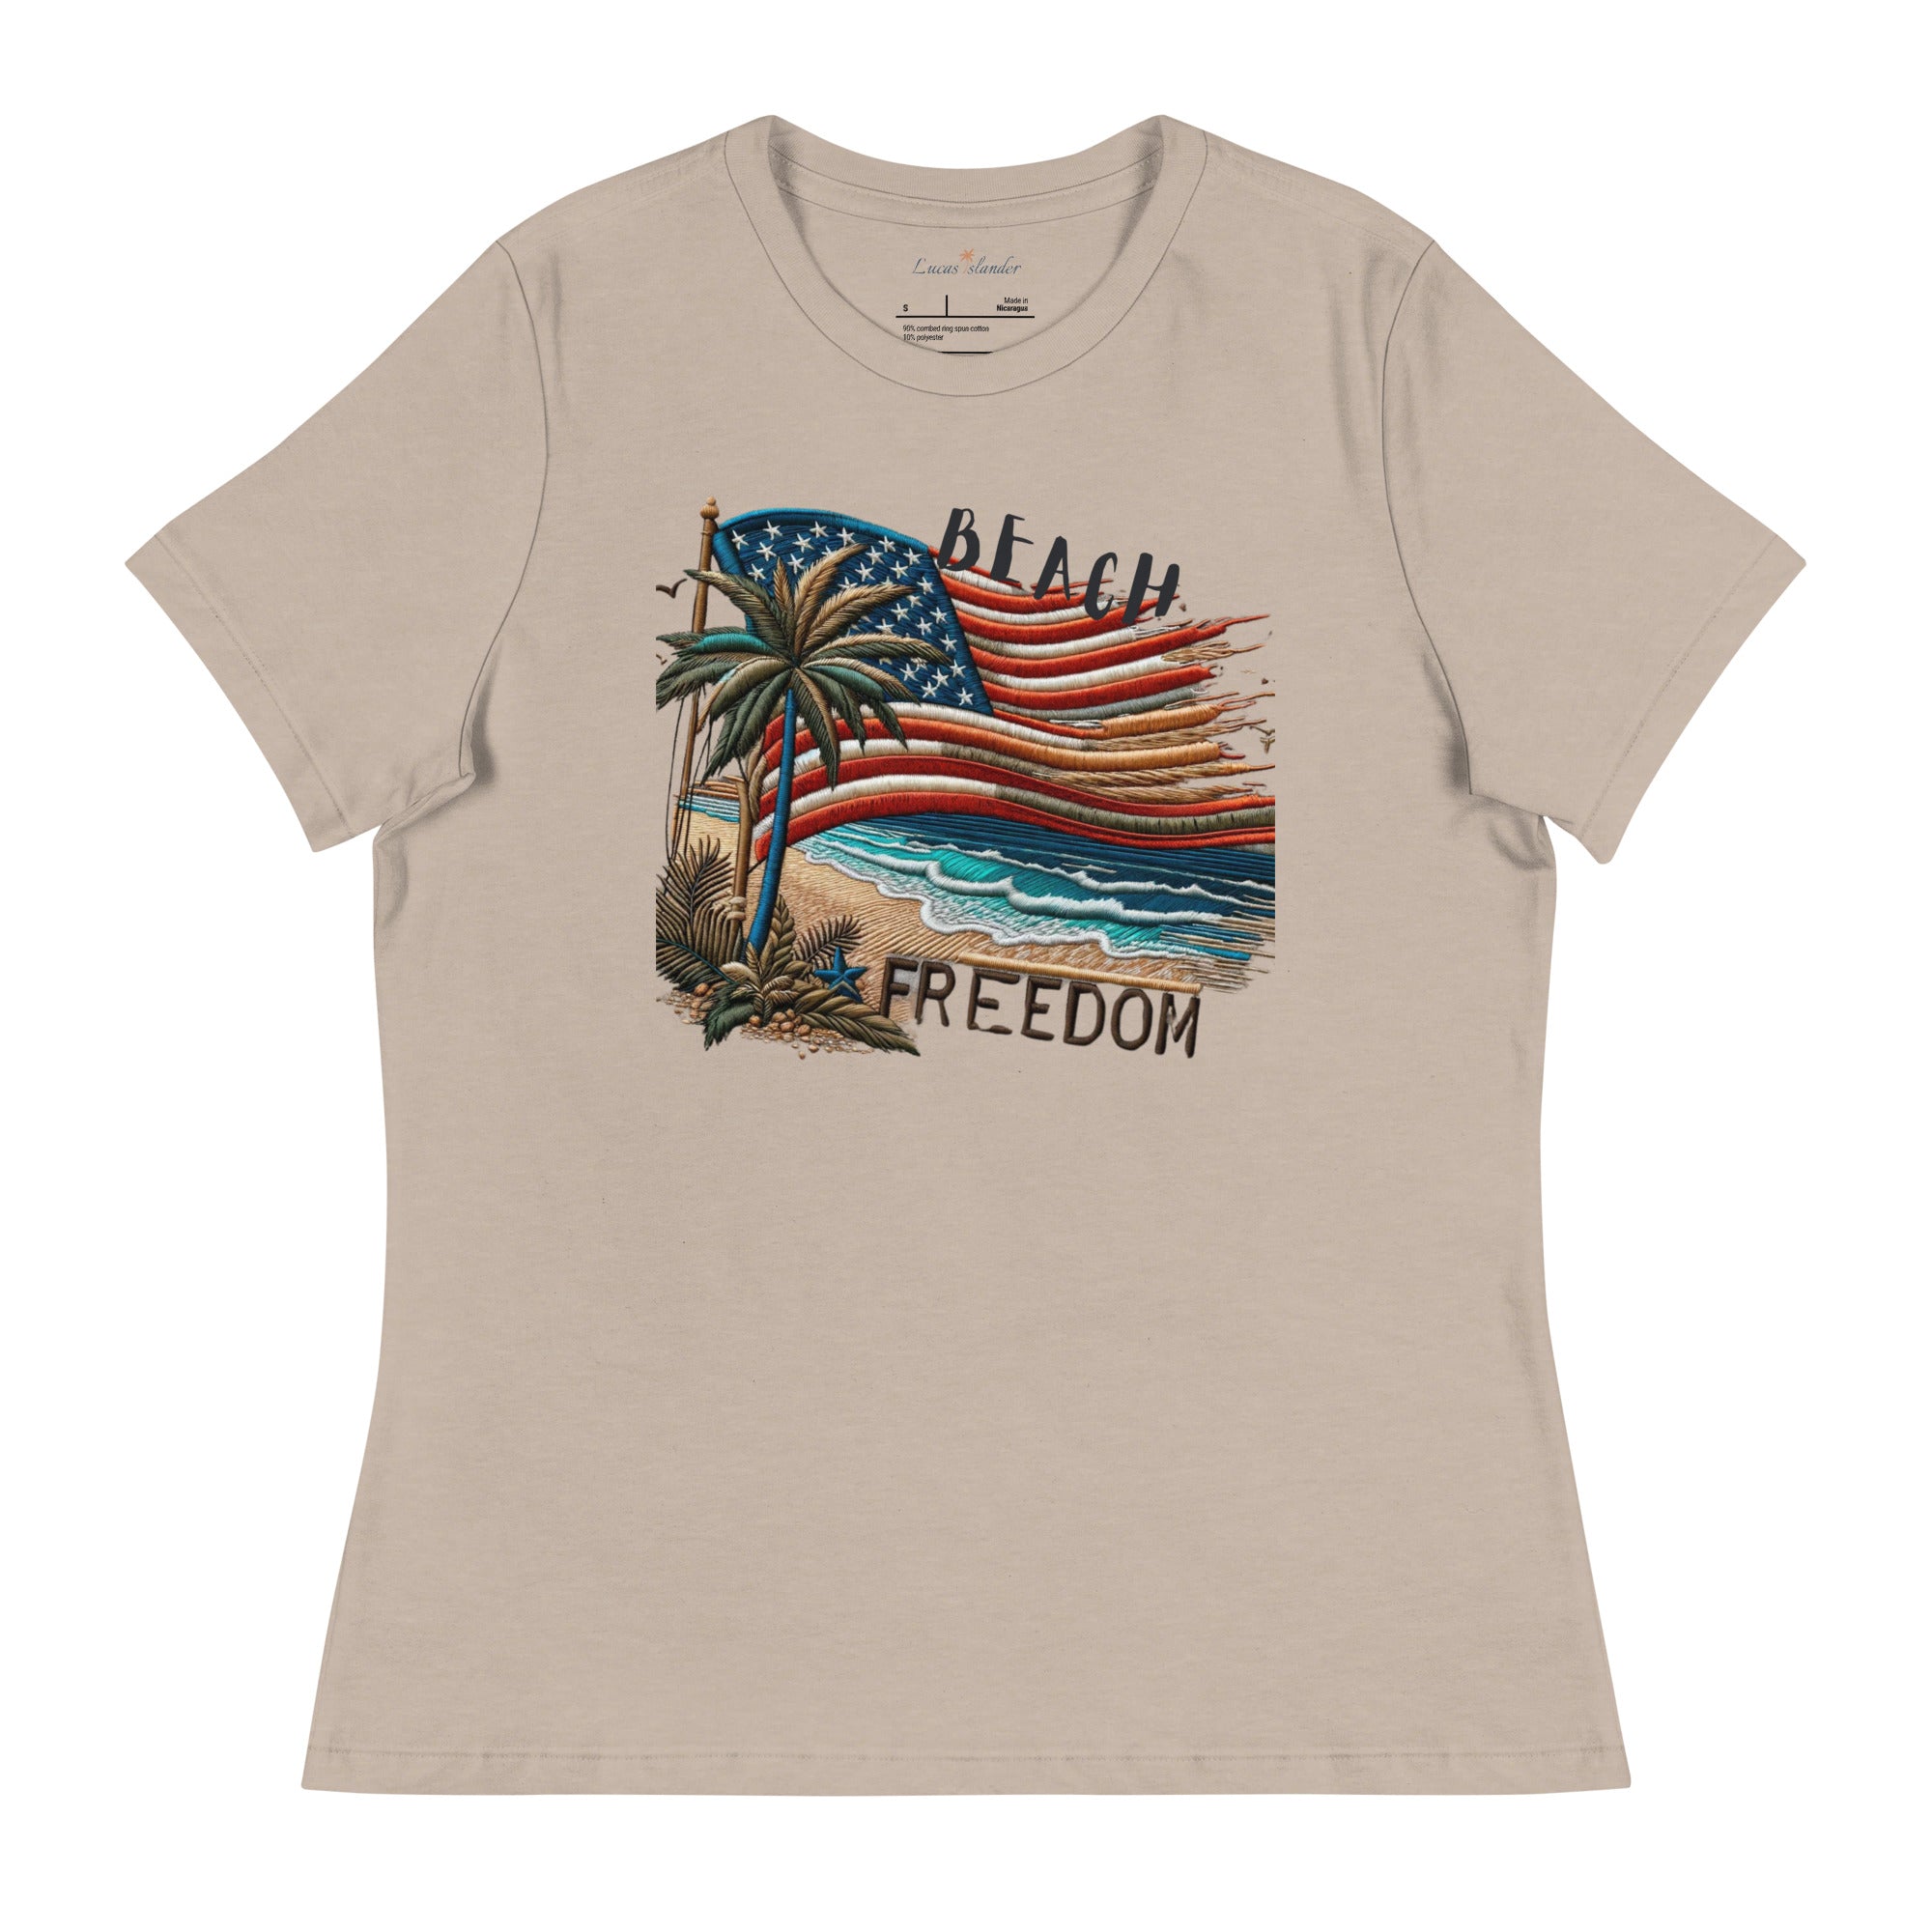 Experience Freedom and Style: American Flag Beach Freedom T-shirt by Lucas Islander Relaxed Fit